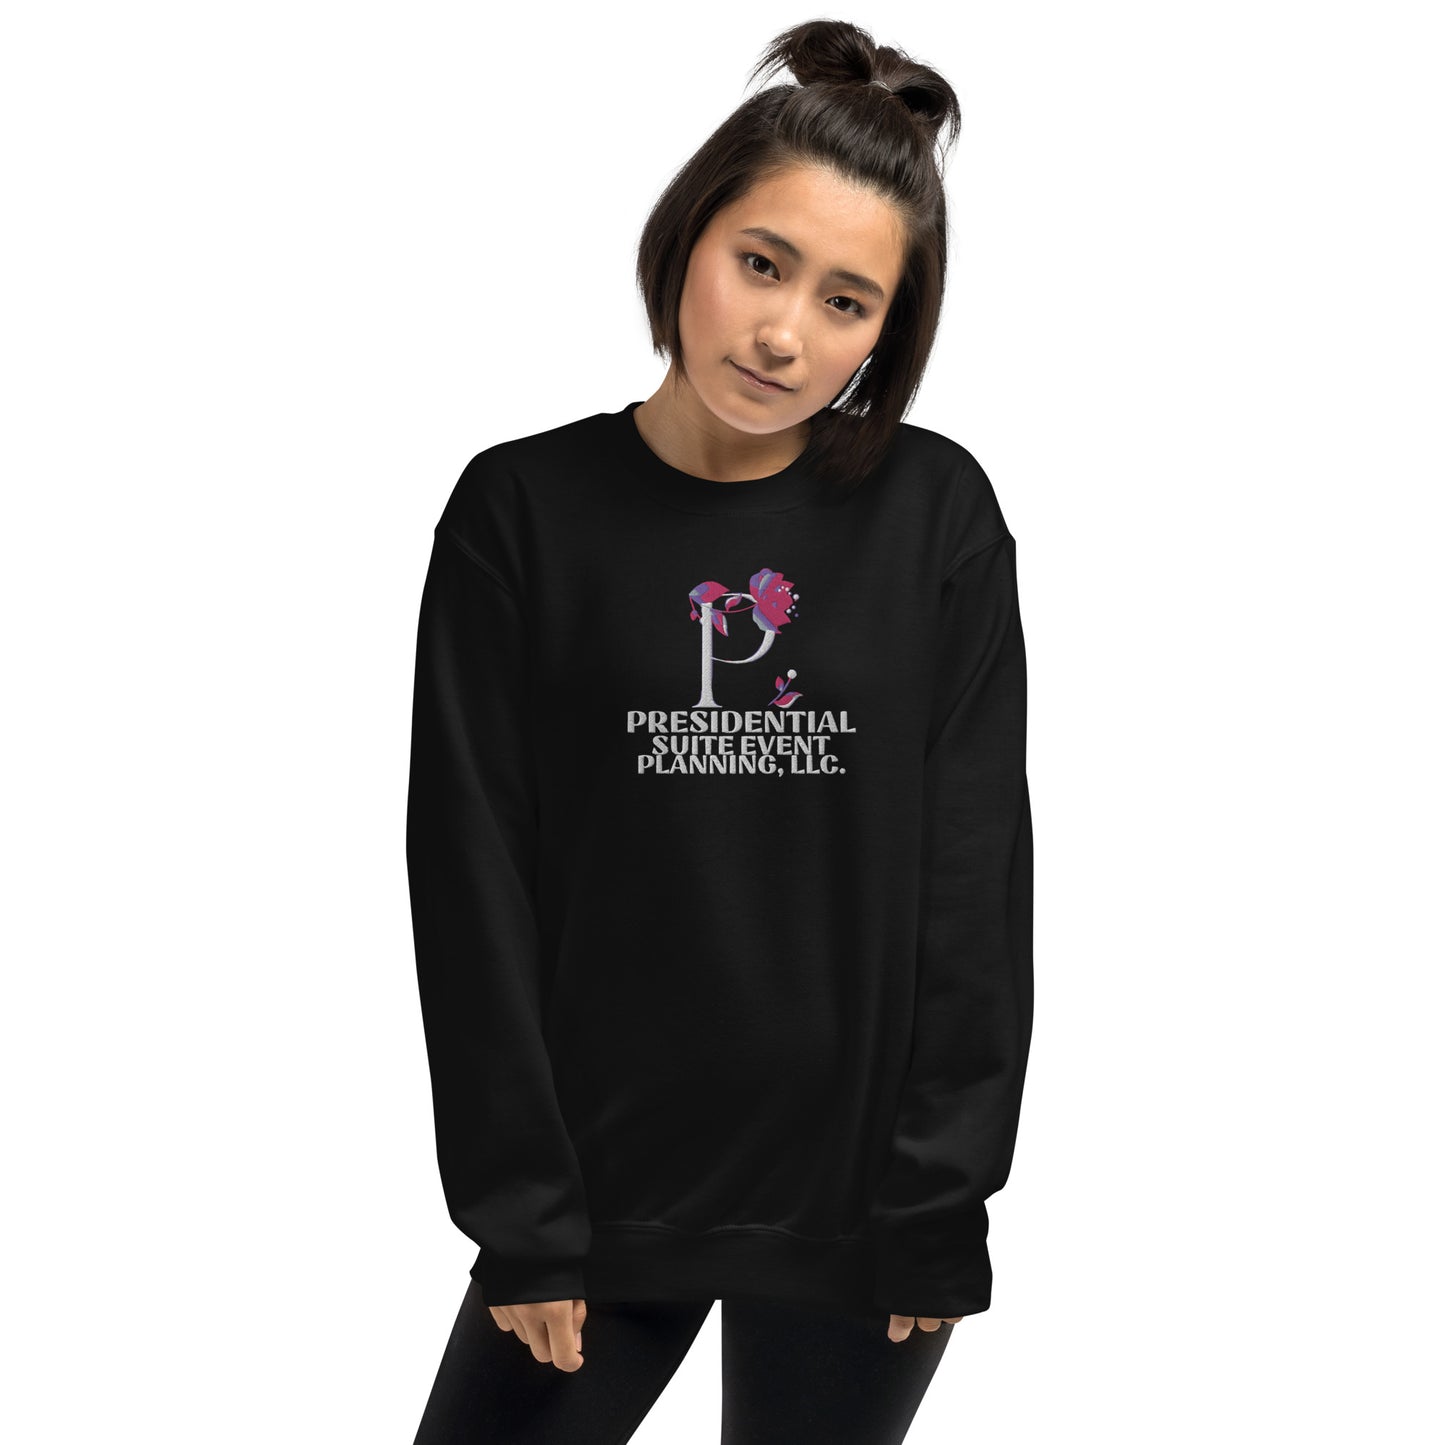 Embroidery Presidential Suite Event Planning Sweatshirt